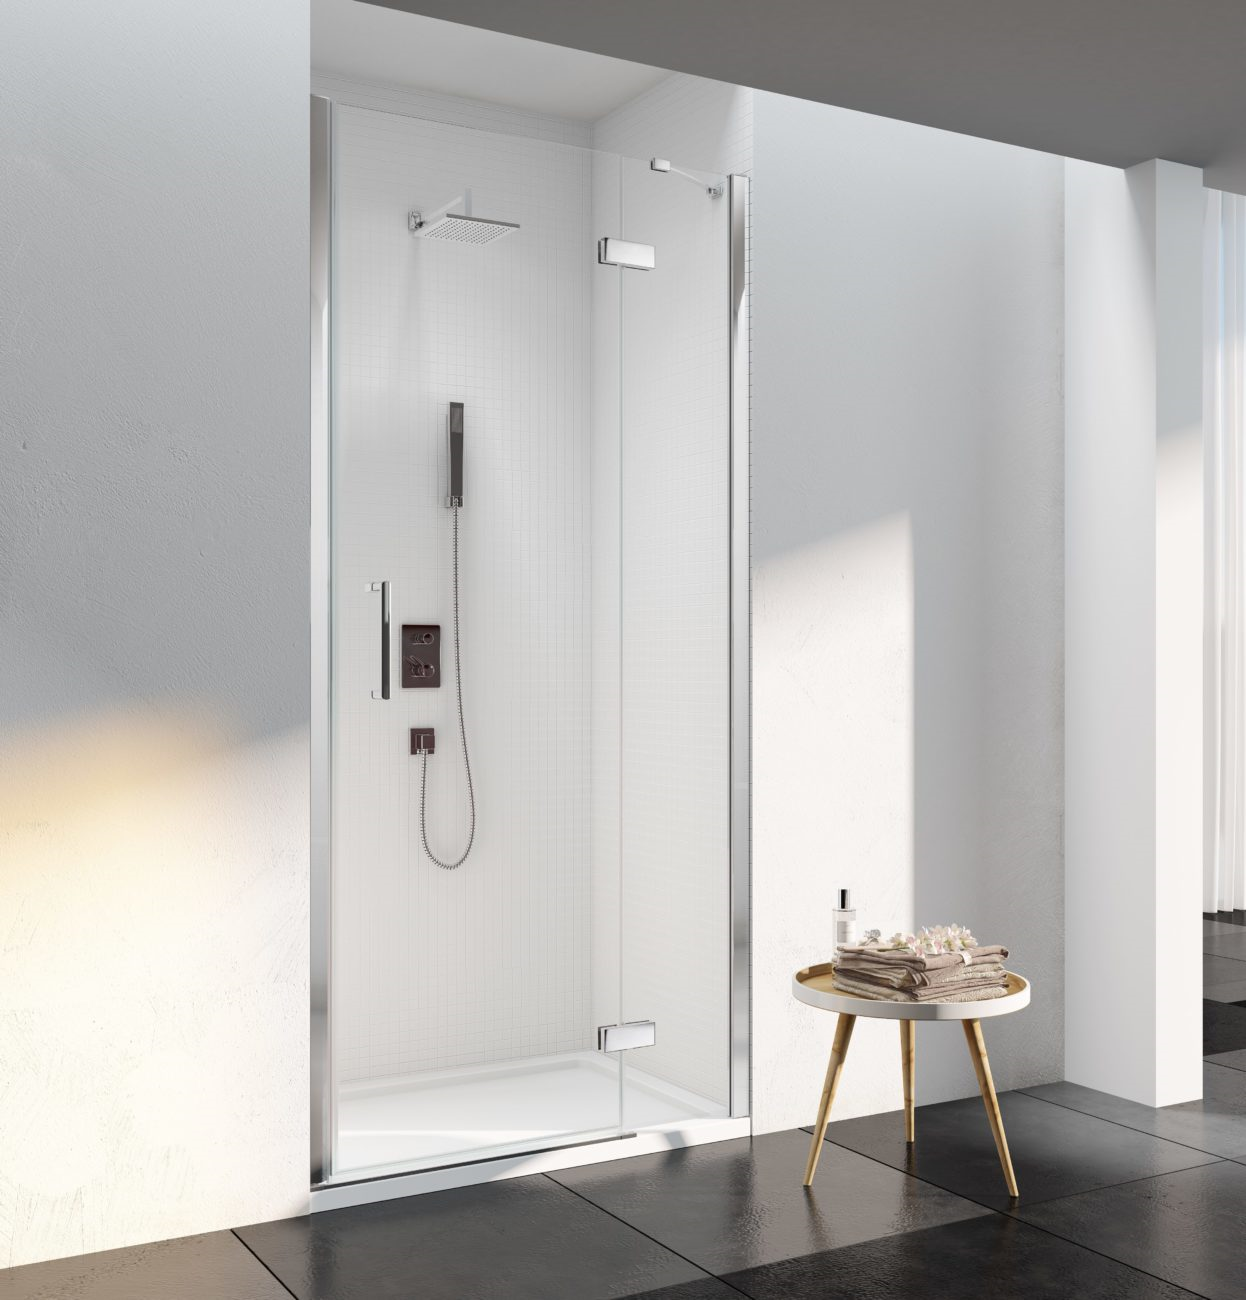 MERLYN S6FB1400RECH Series 6 Framless Hinged Shower Door 1400mm with In-Line Panel & Shower Tray for Recess Fitting